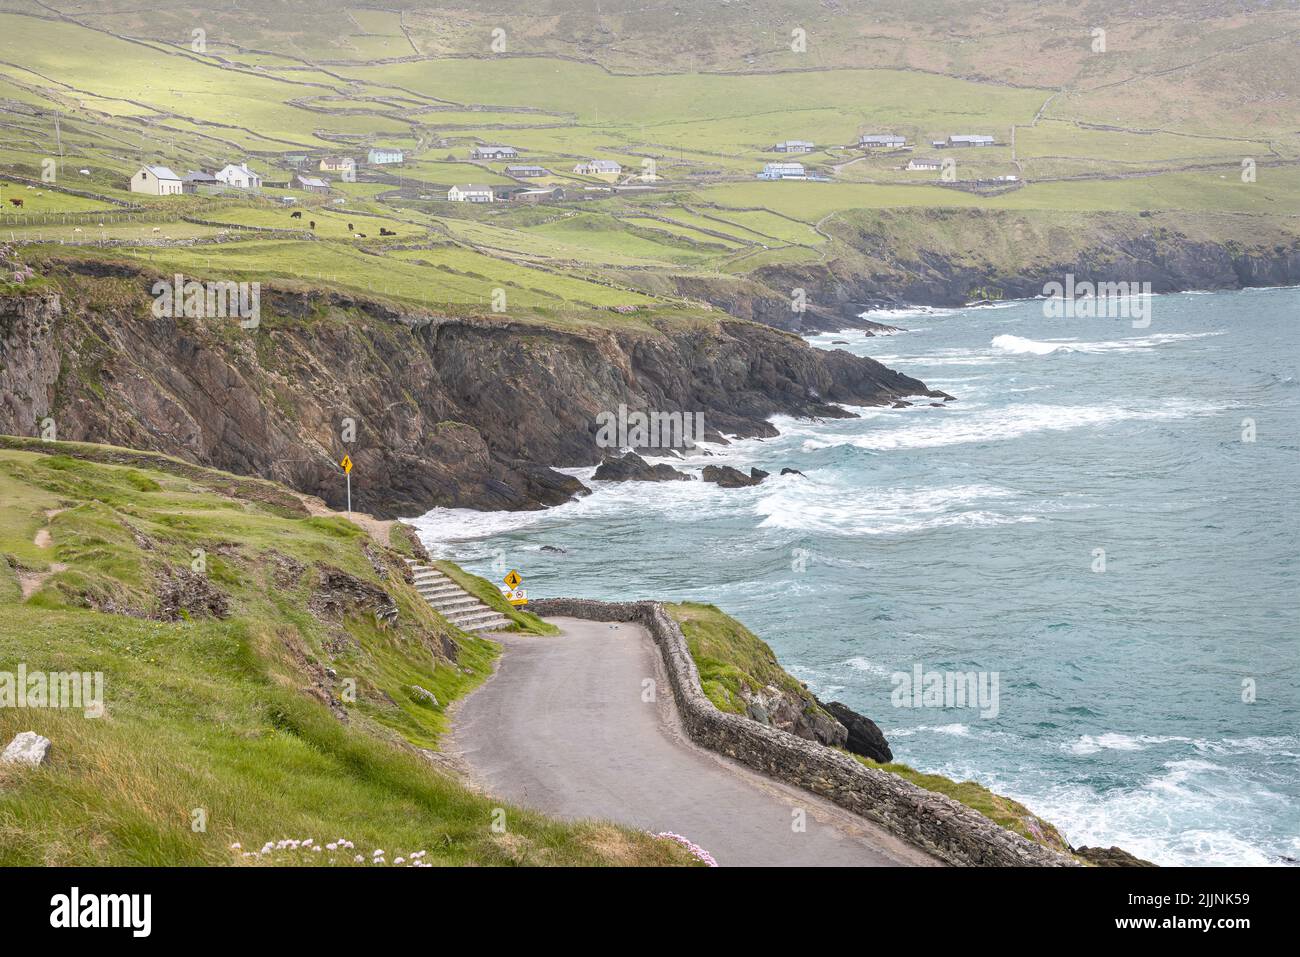 The Road to Coumeenoole Beach at high tide in County Kerry, Ireland Stock Photo